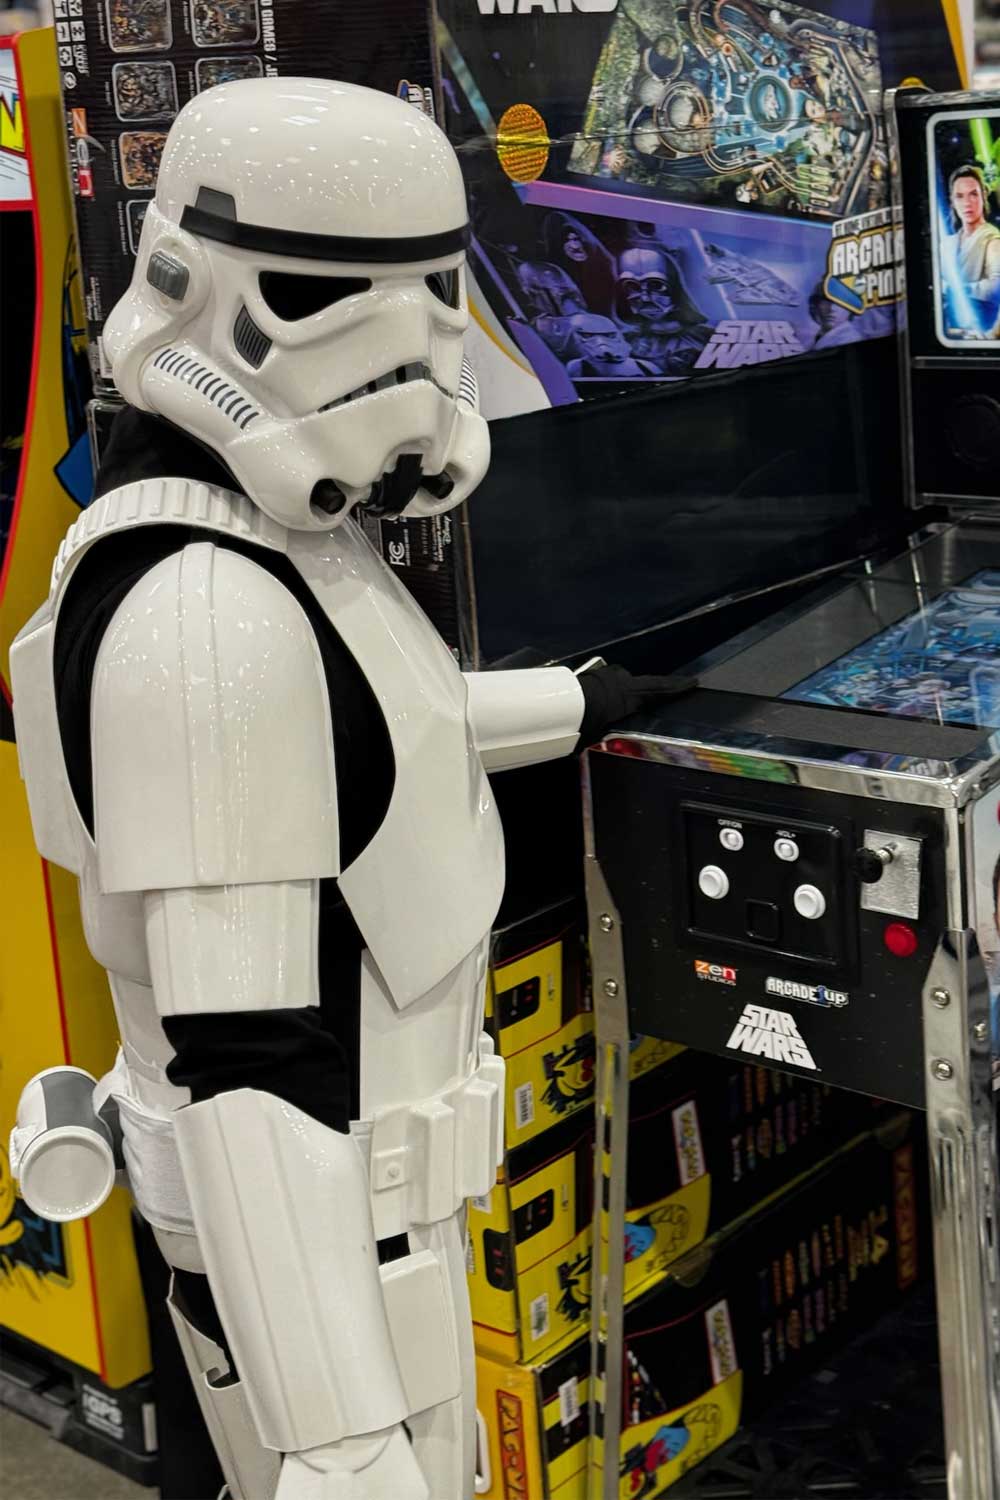 Stormtrooper armour review from Chris